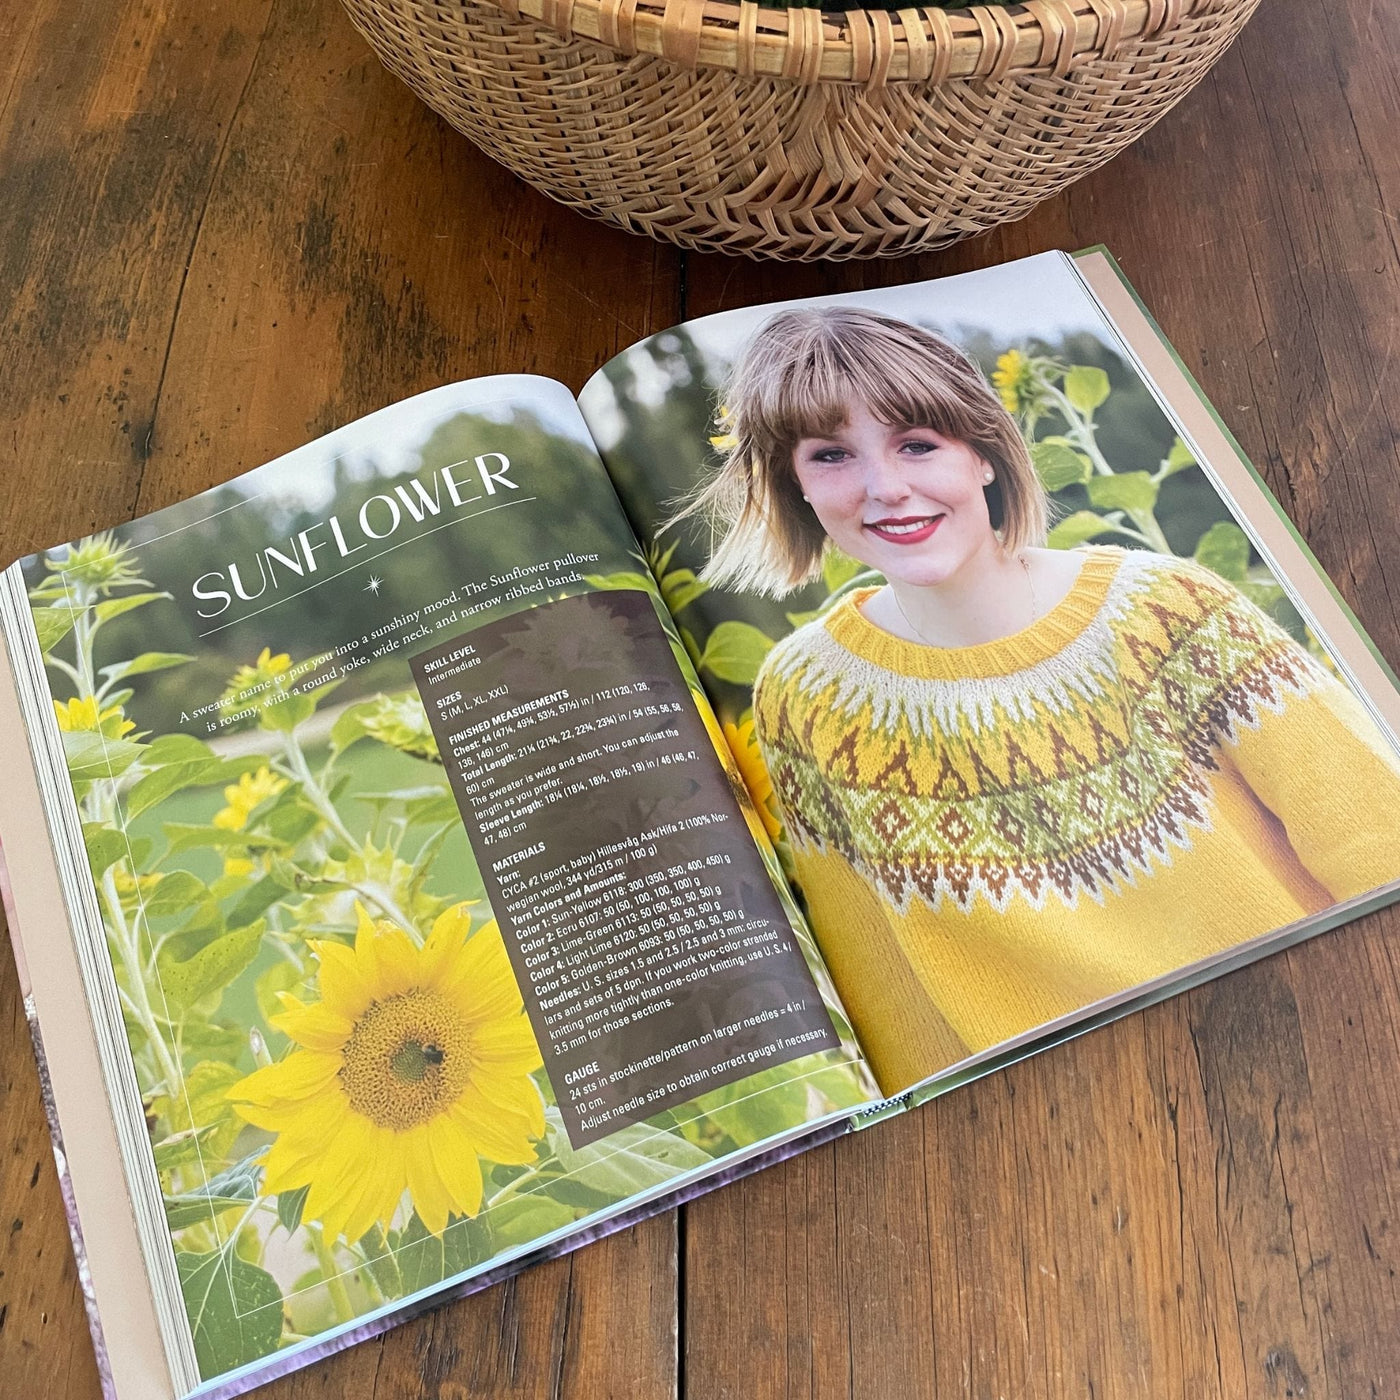 Inside pages of book Norwegian Sweaters & Jackets by Kari Hestnes shows woman wearing yellow colorwork sweater in Sunflower field.